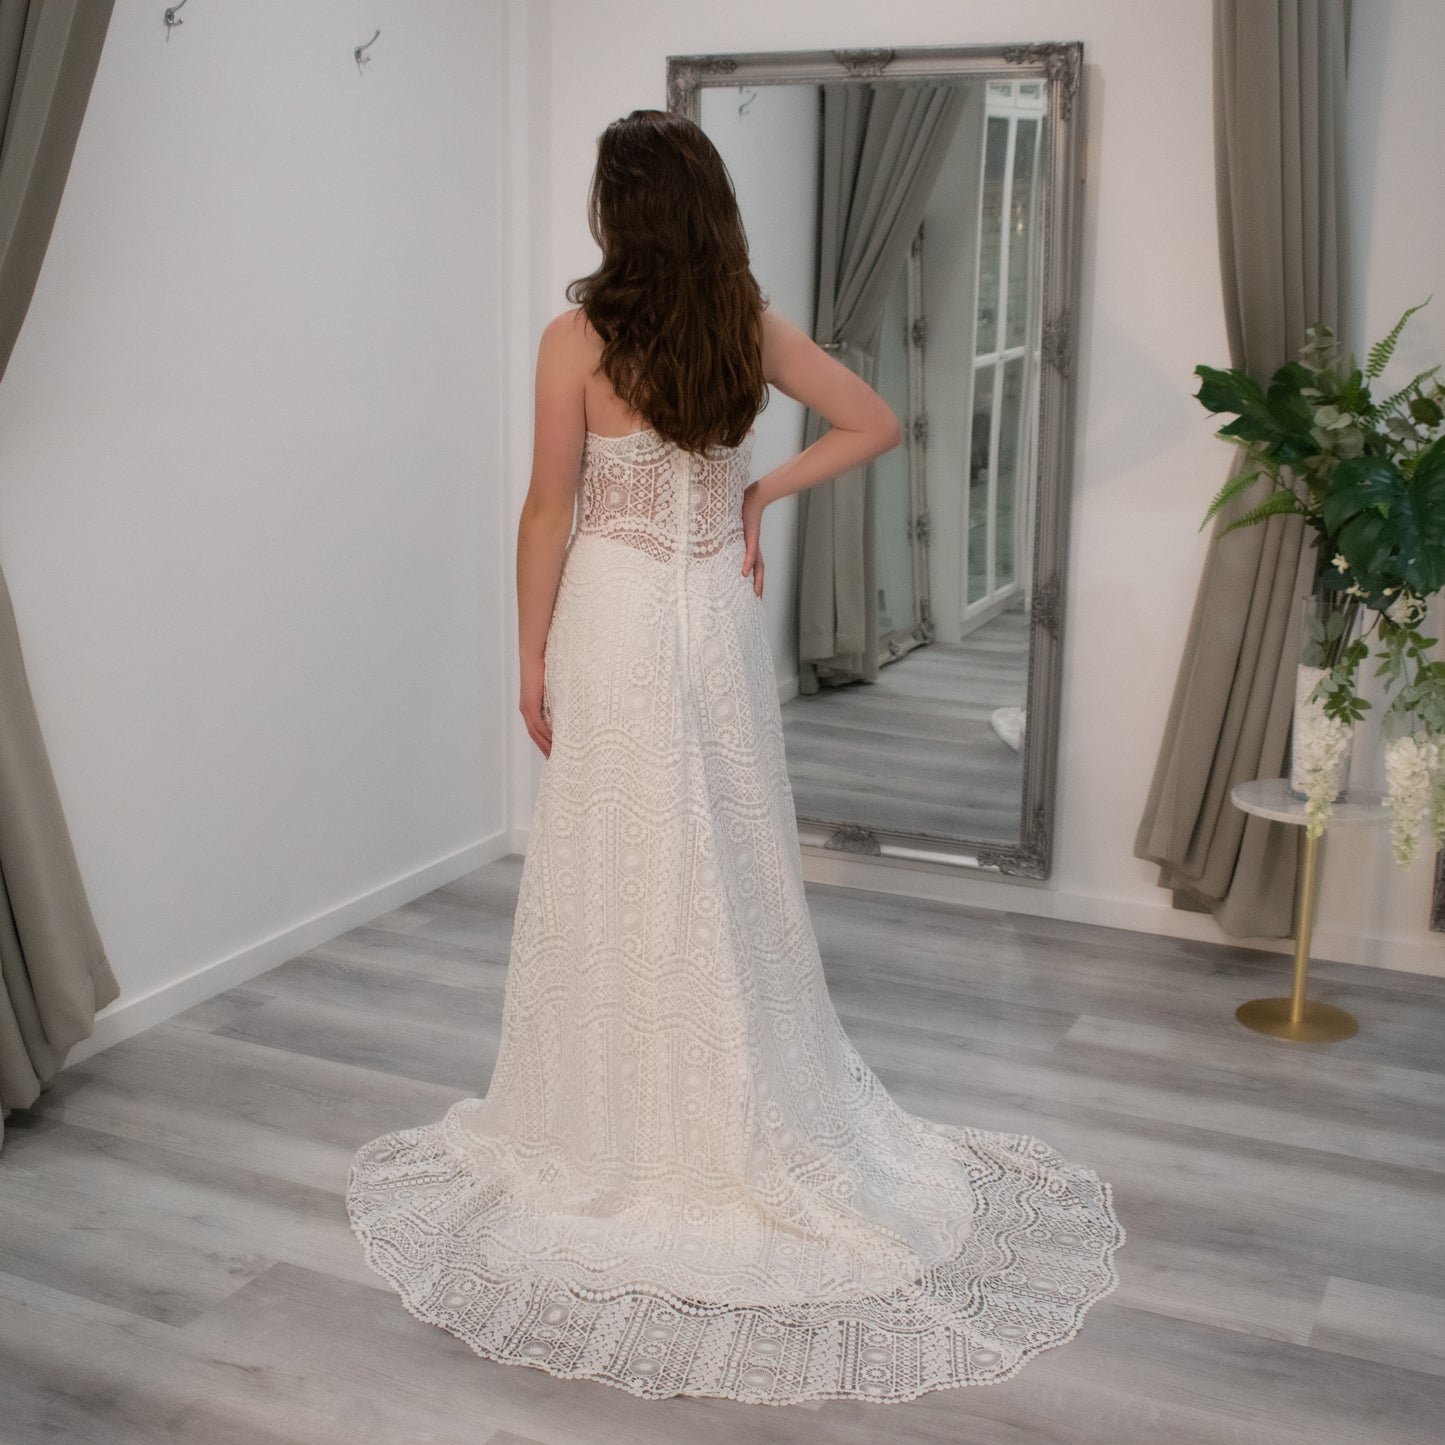 Bride adorned in Gwen Boho-inspired wedding gown, highlighting the wave lace design, sweetheart swirl neckline, and elegant train.